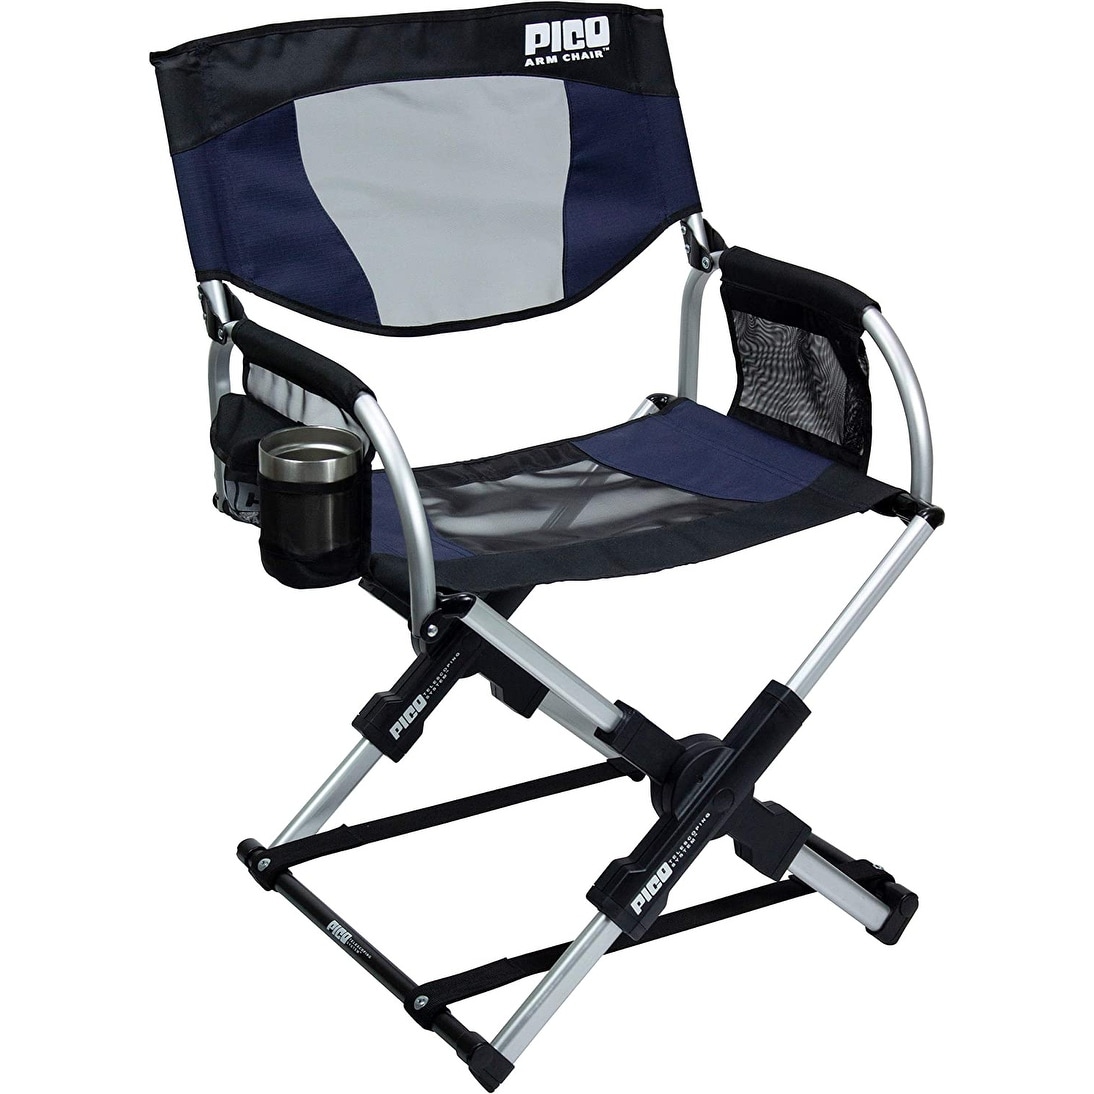 Arm Chair Outdoor Folding Camping Chair With Carry Bag